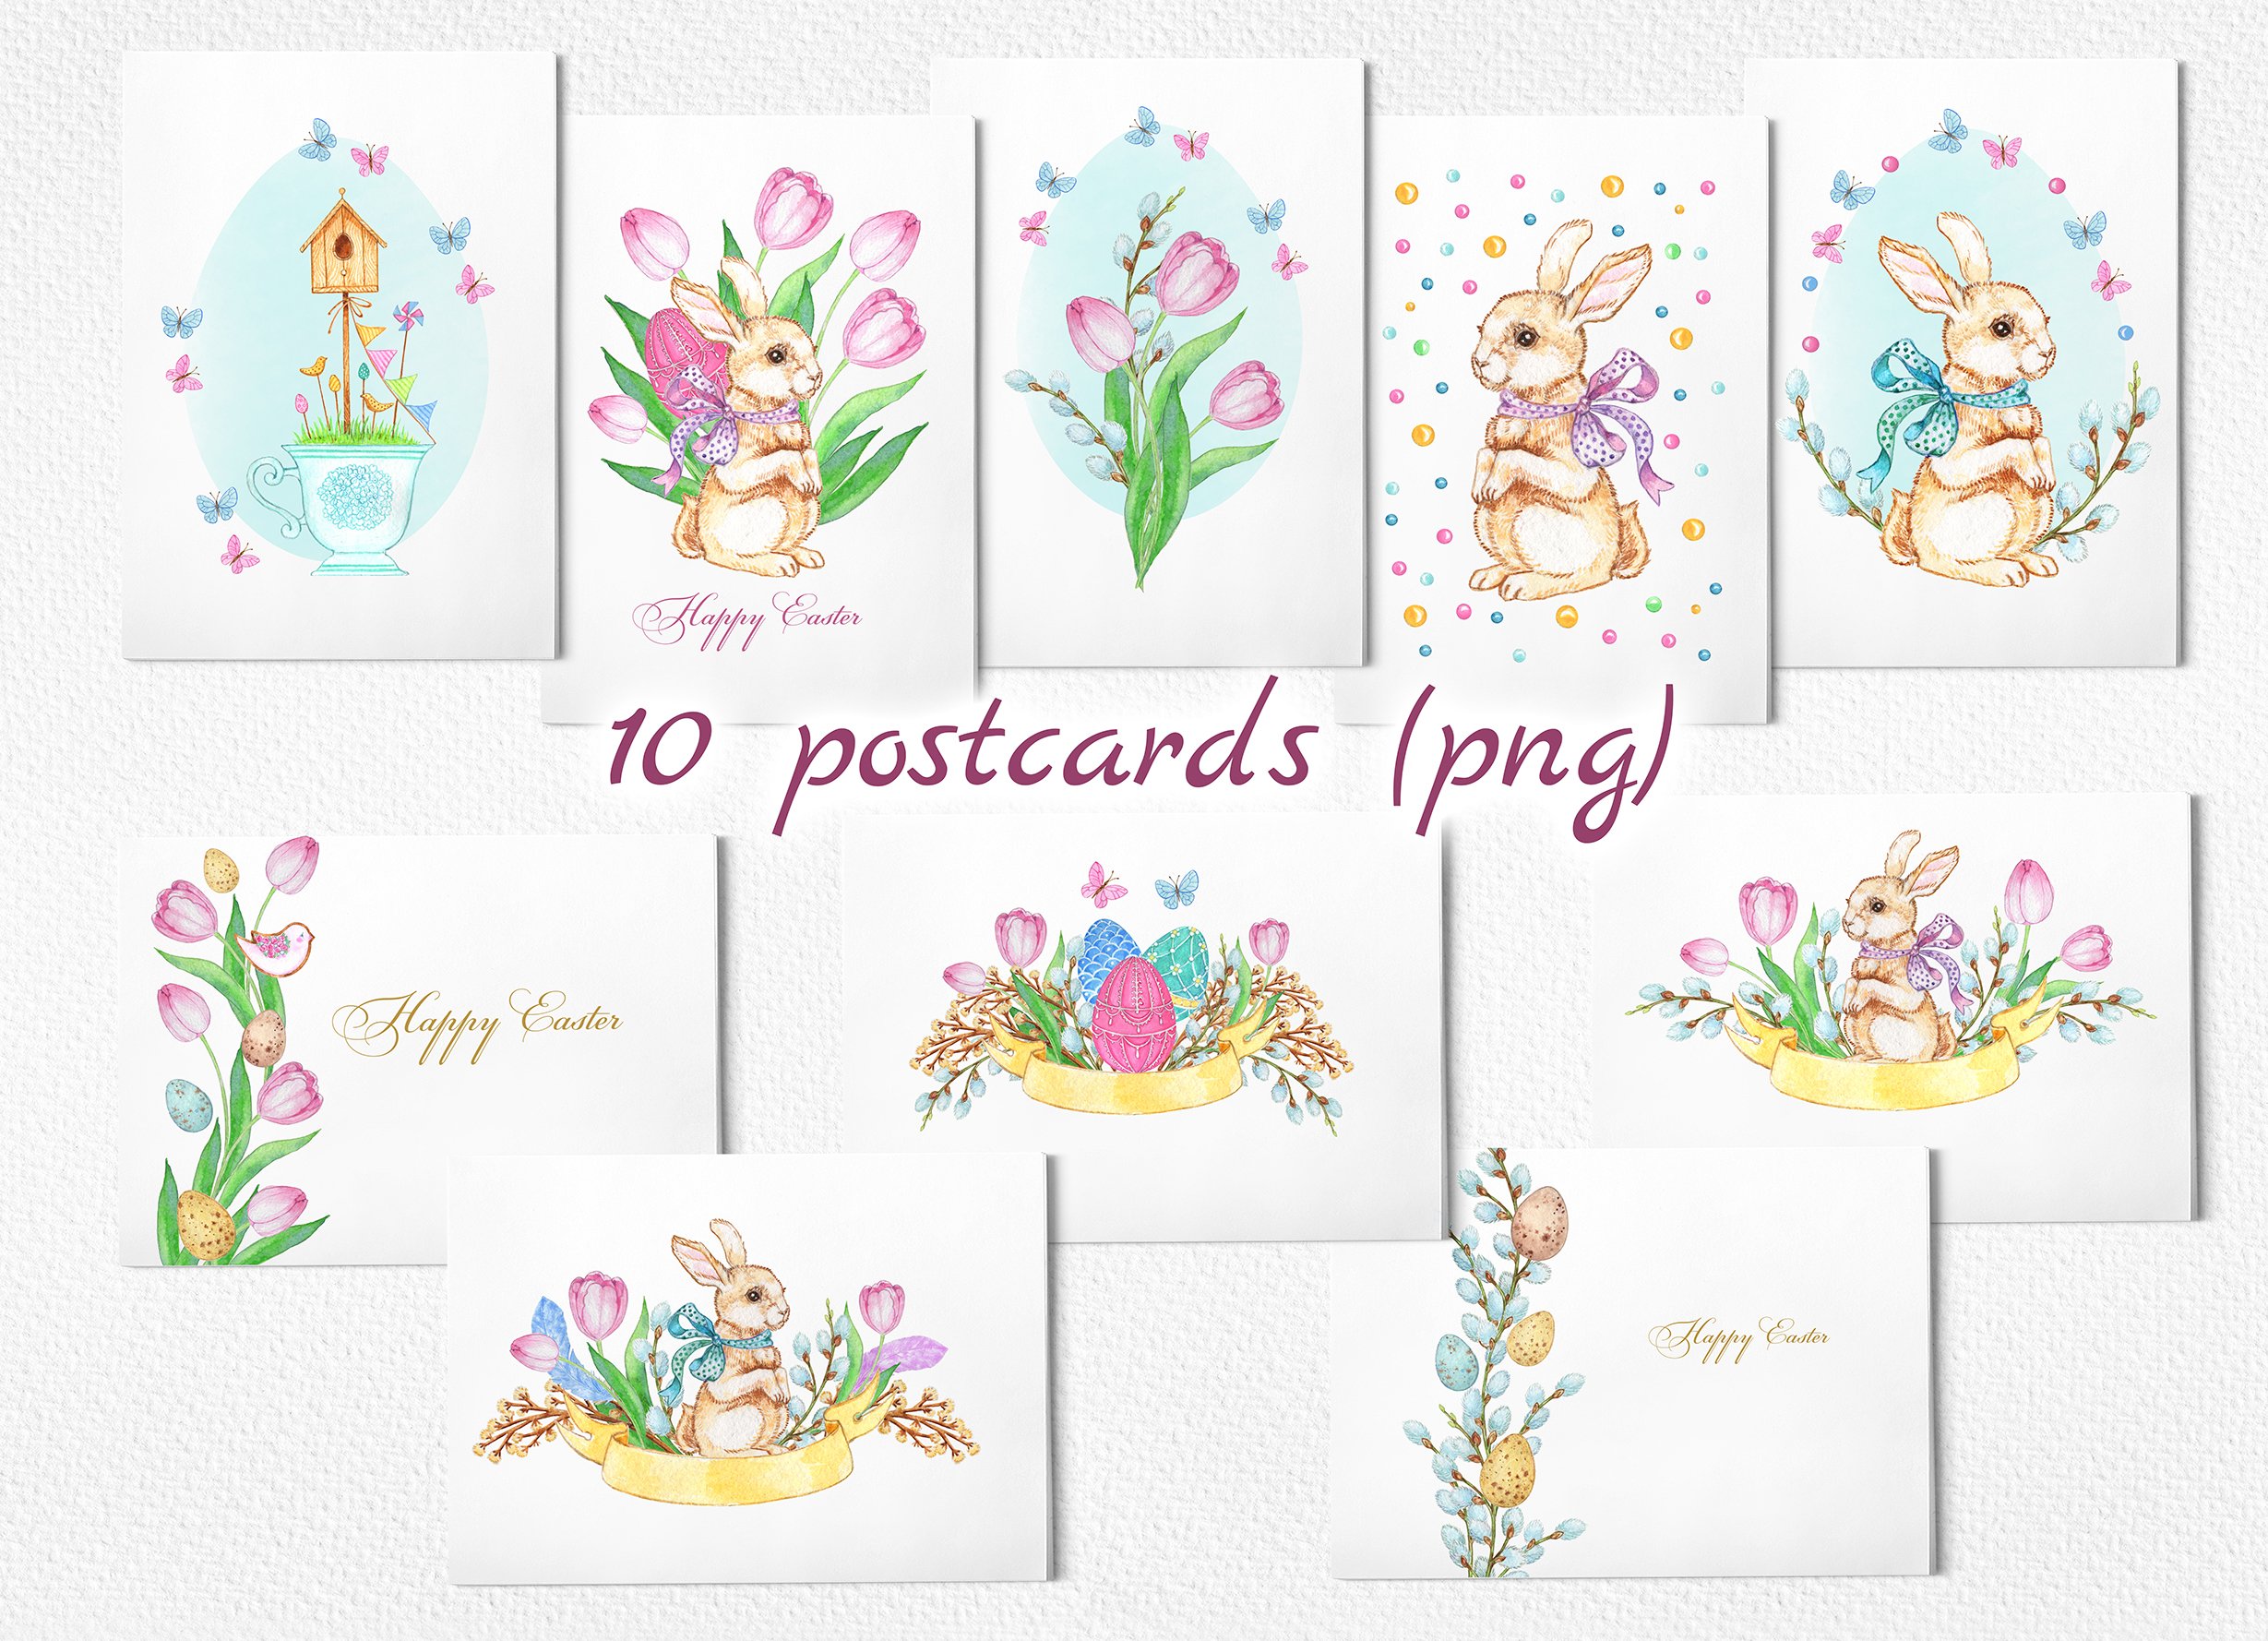 Nice Easter postcards for you.